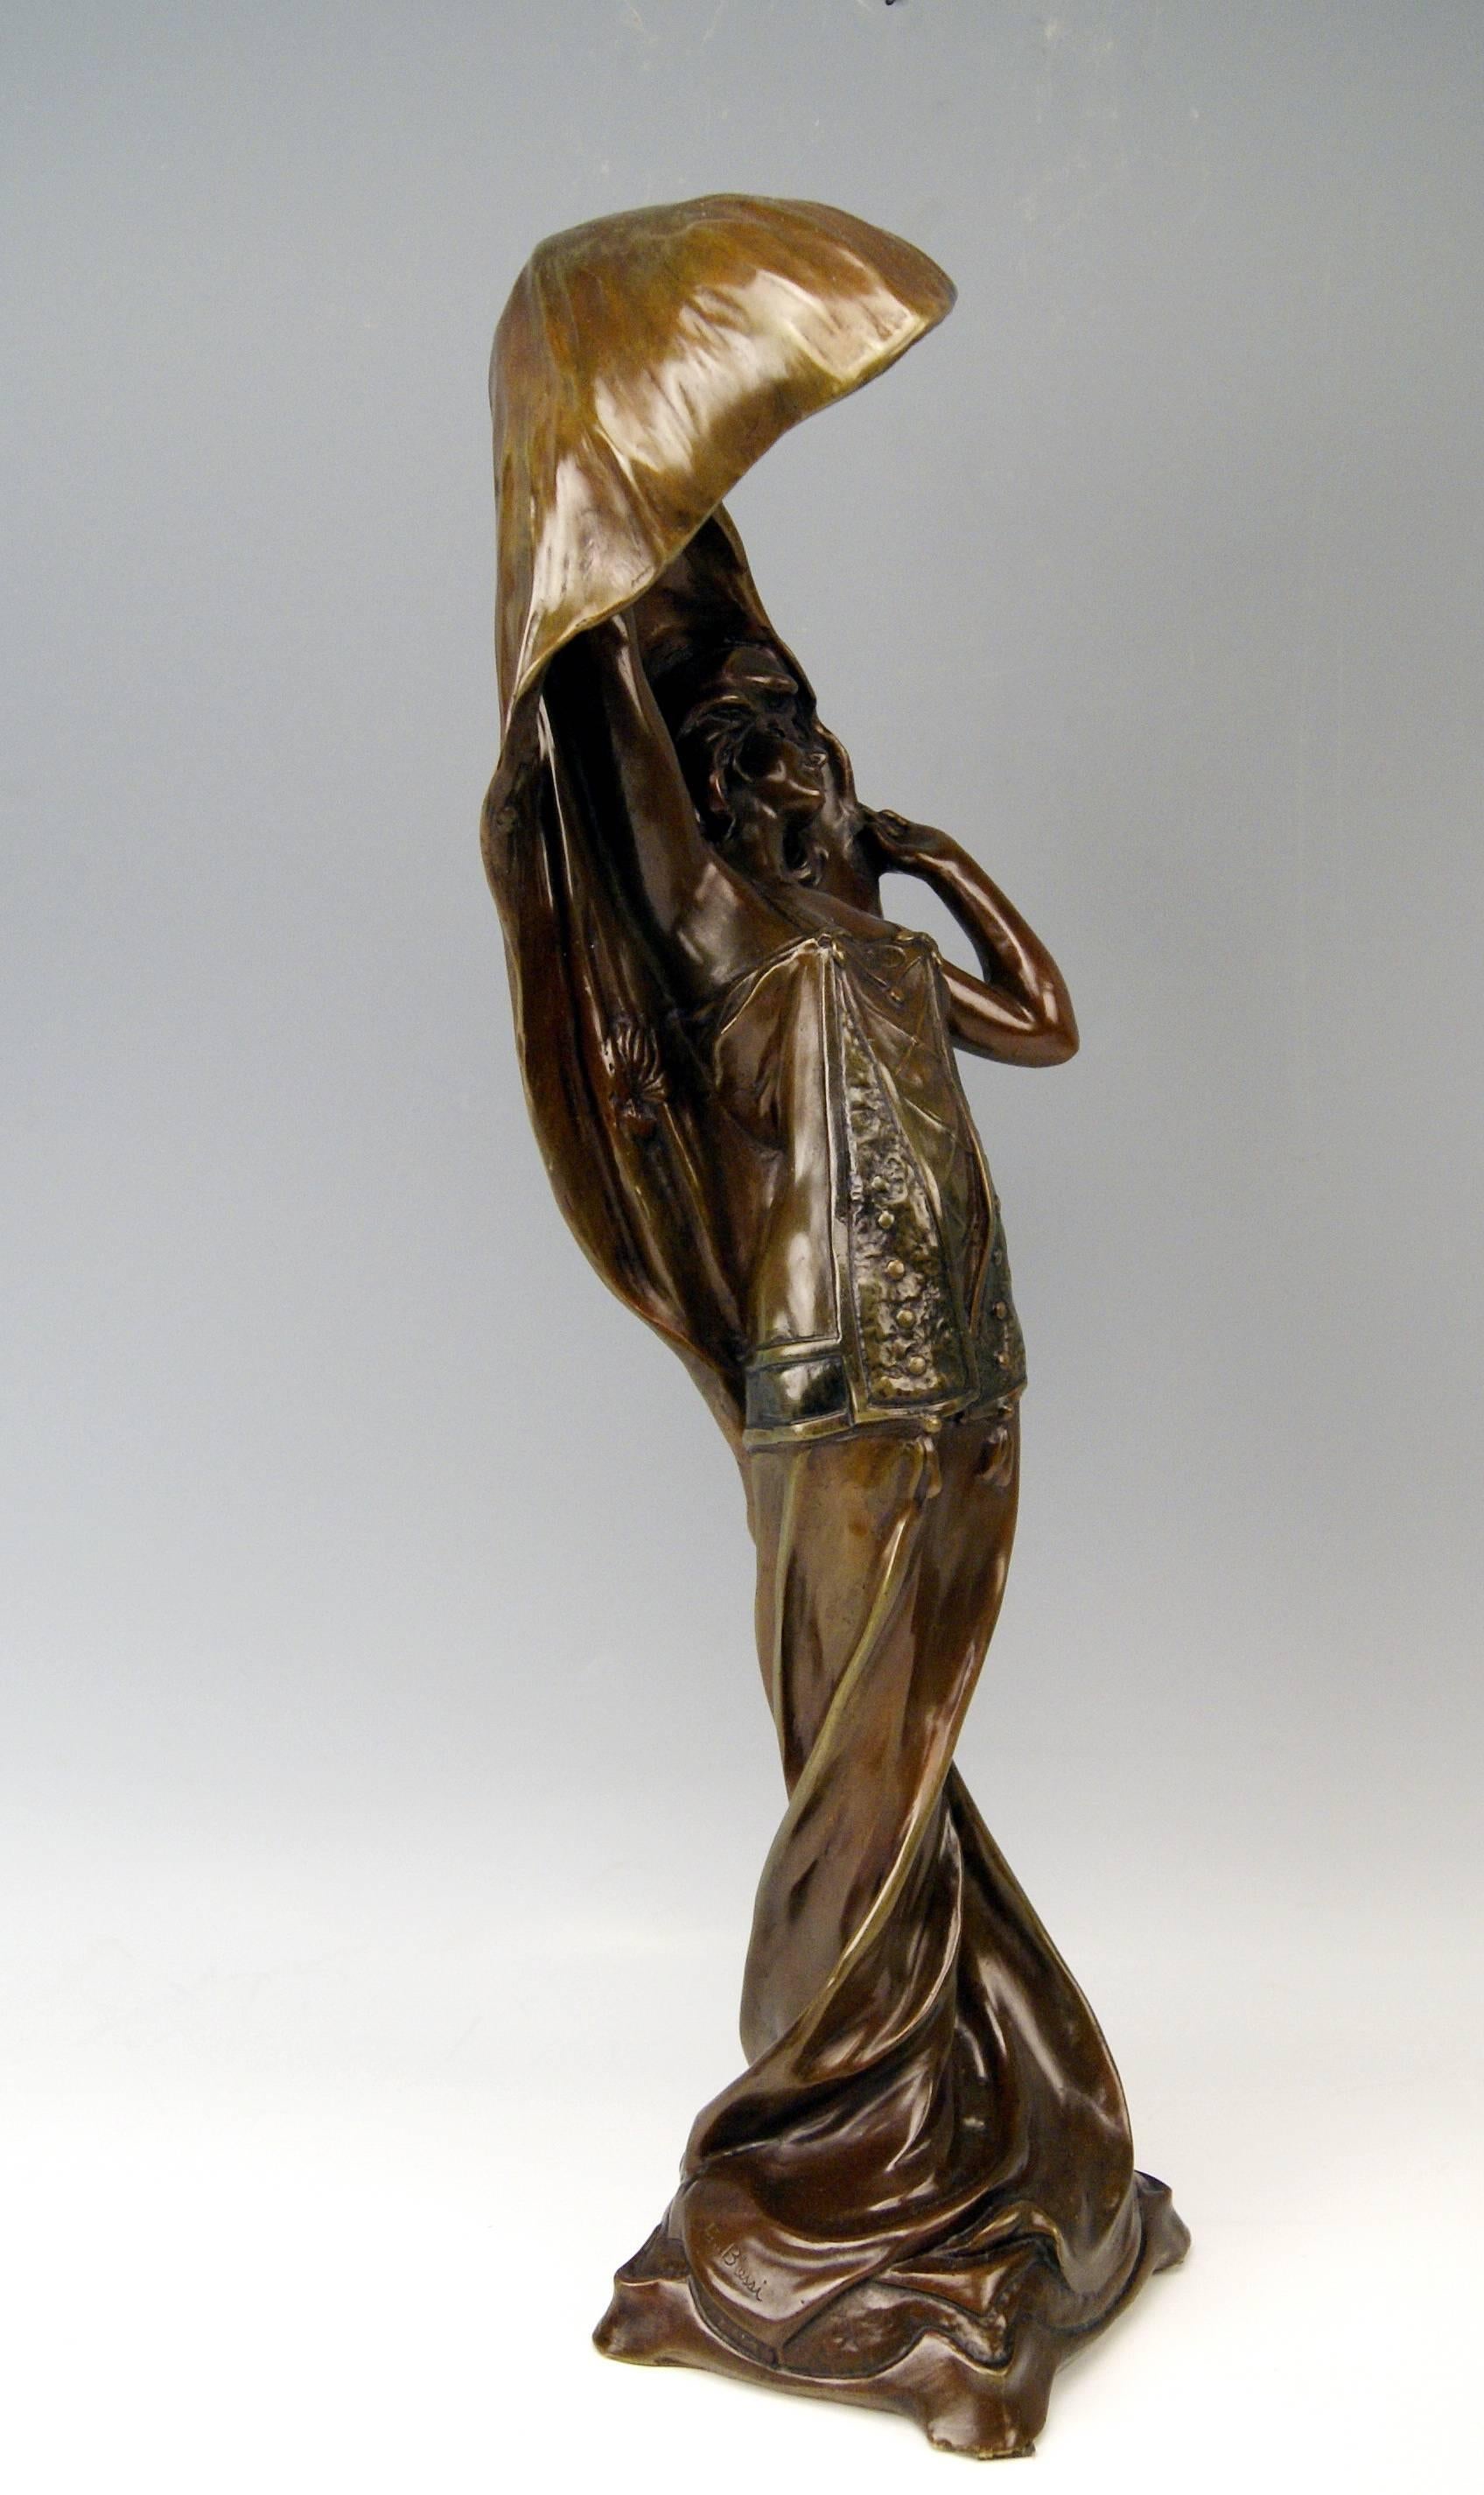 Gorgeous bronze female figurine Art Nouveau made by Italian manufactory.

Hallmarked:
G. Bessi (signature well visible at right lateral side).
It is the Italian sculptor Giuseppe Bessi (1857-1922).

Some informations referring to the